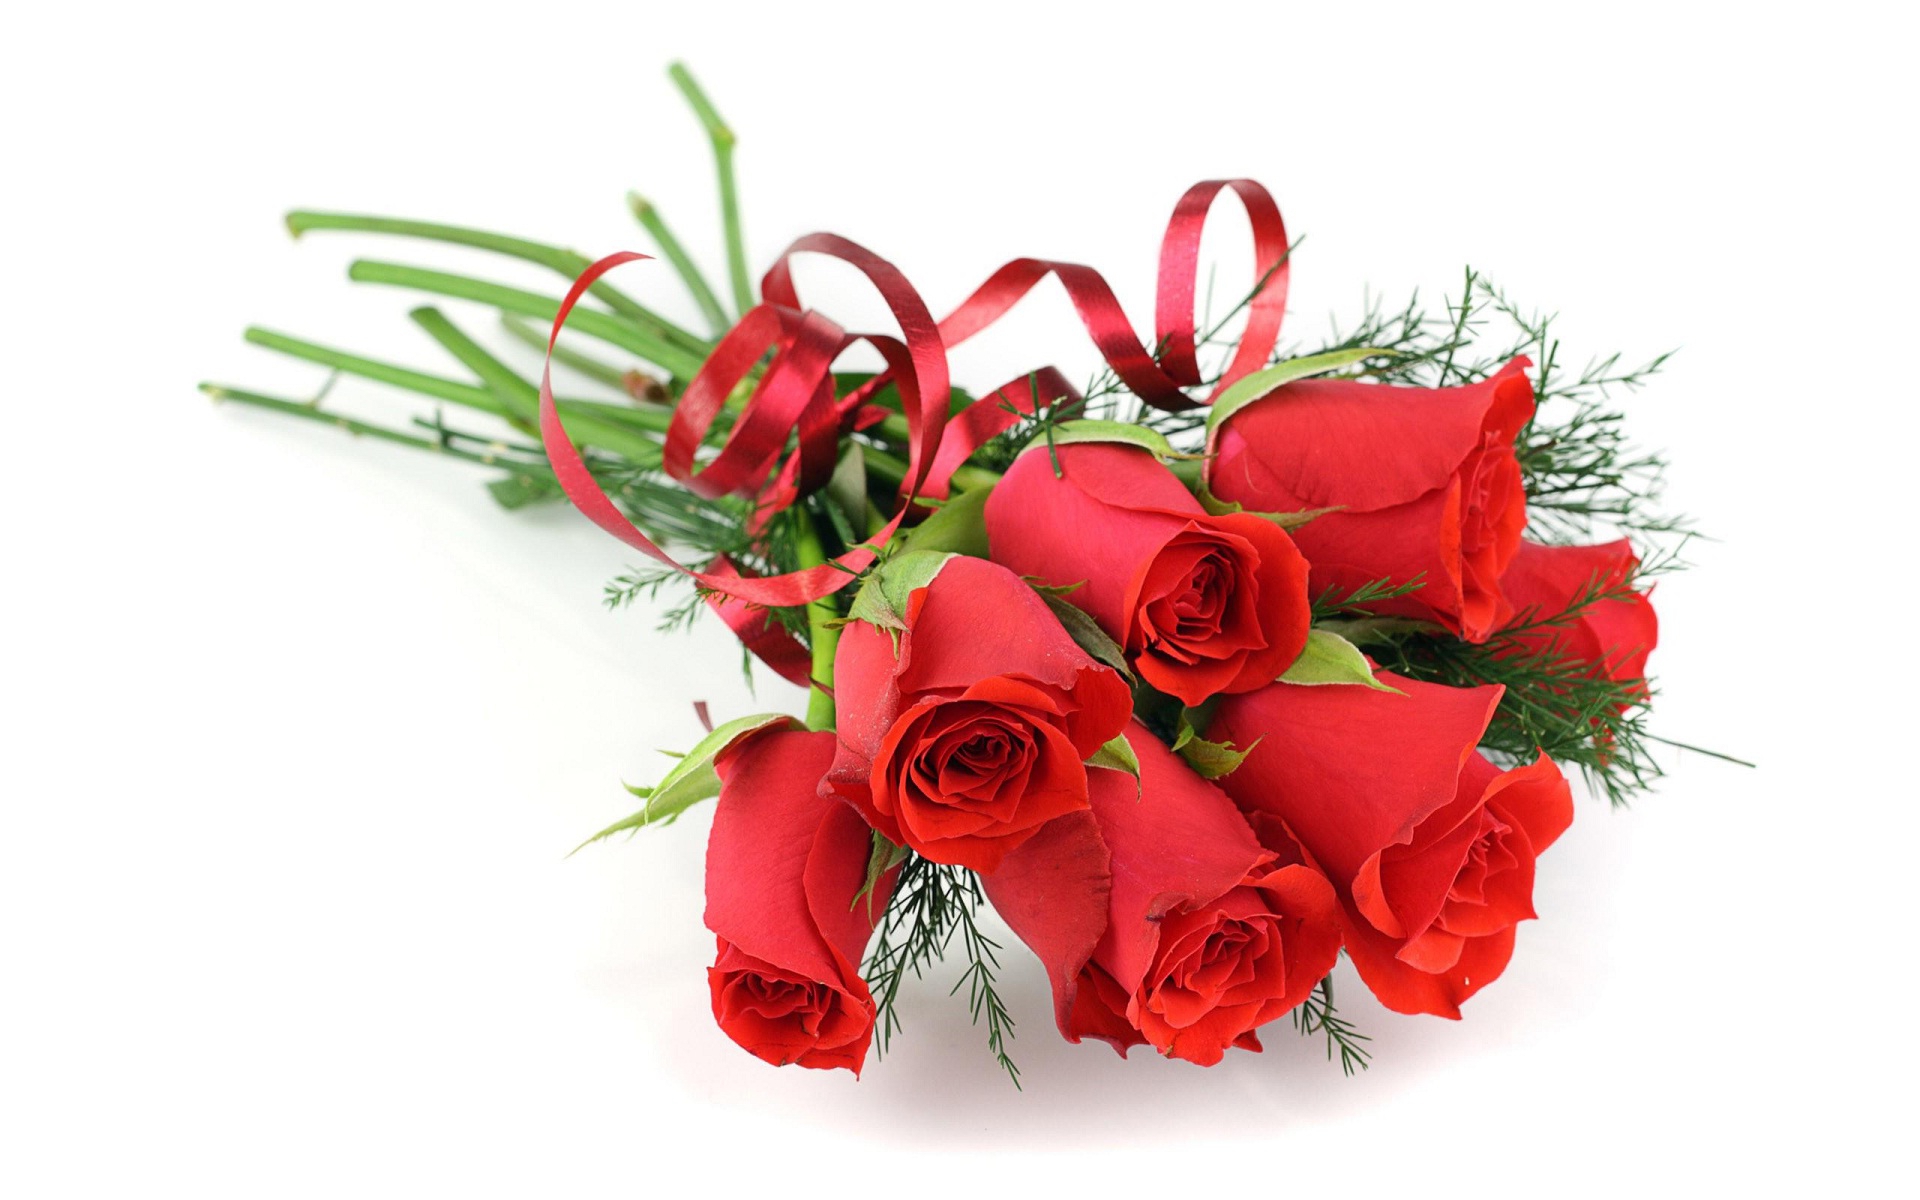 Rose Flower Hd Bouquet Red Rose Pink Rose Flowers Bouquet Hd